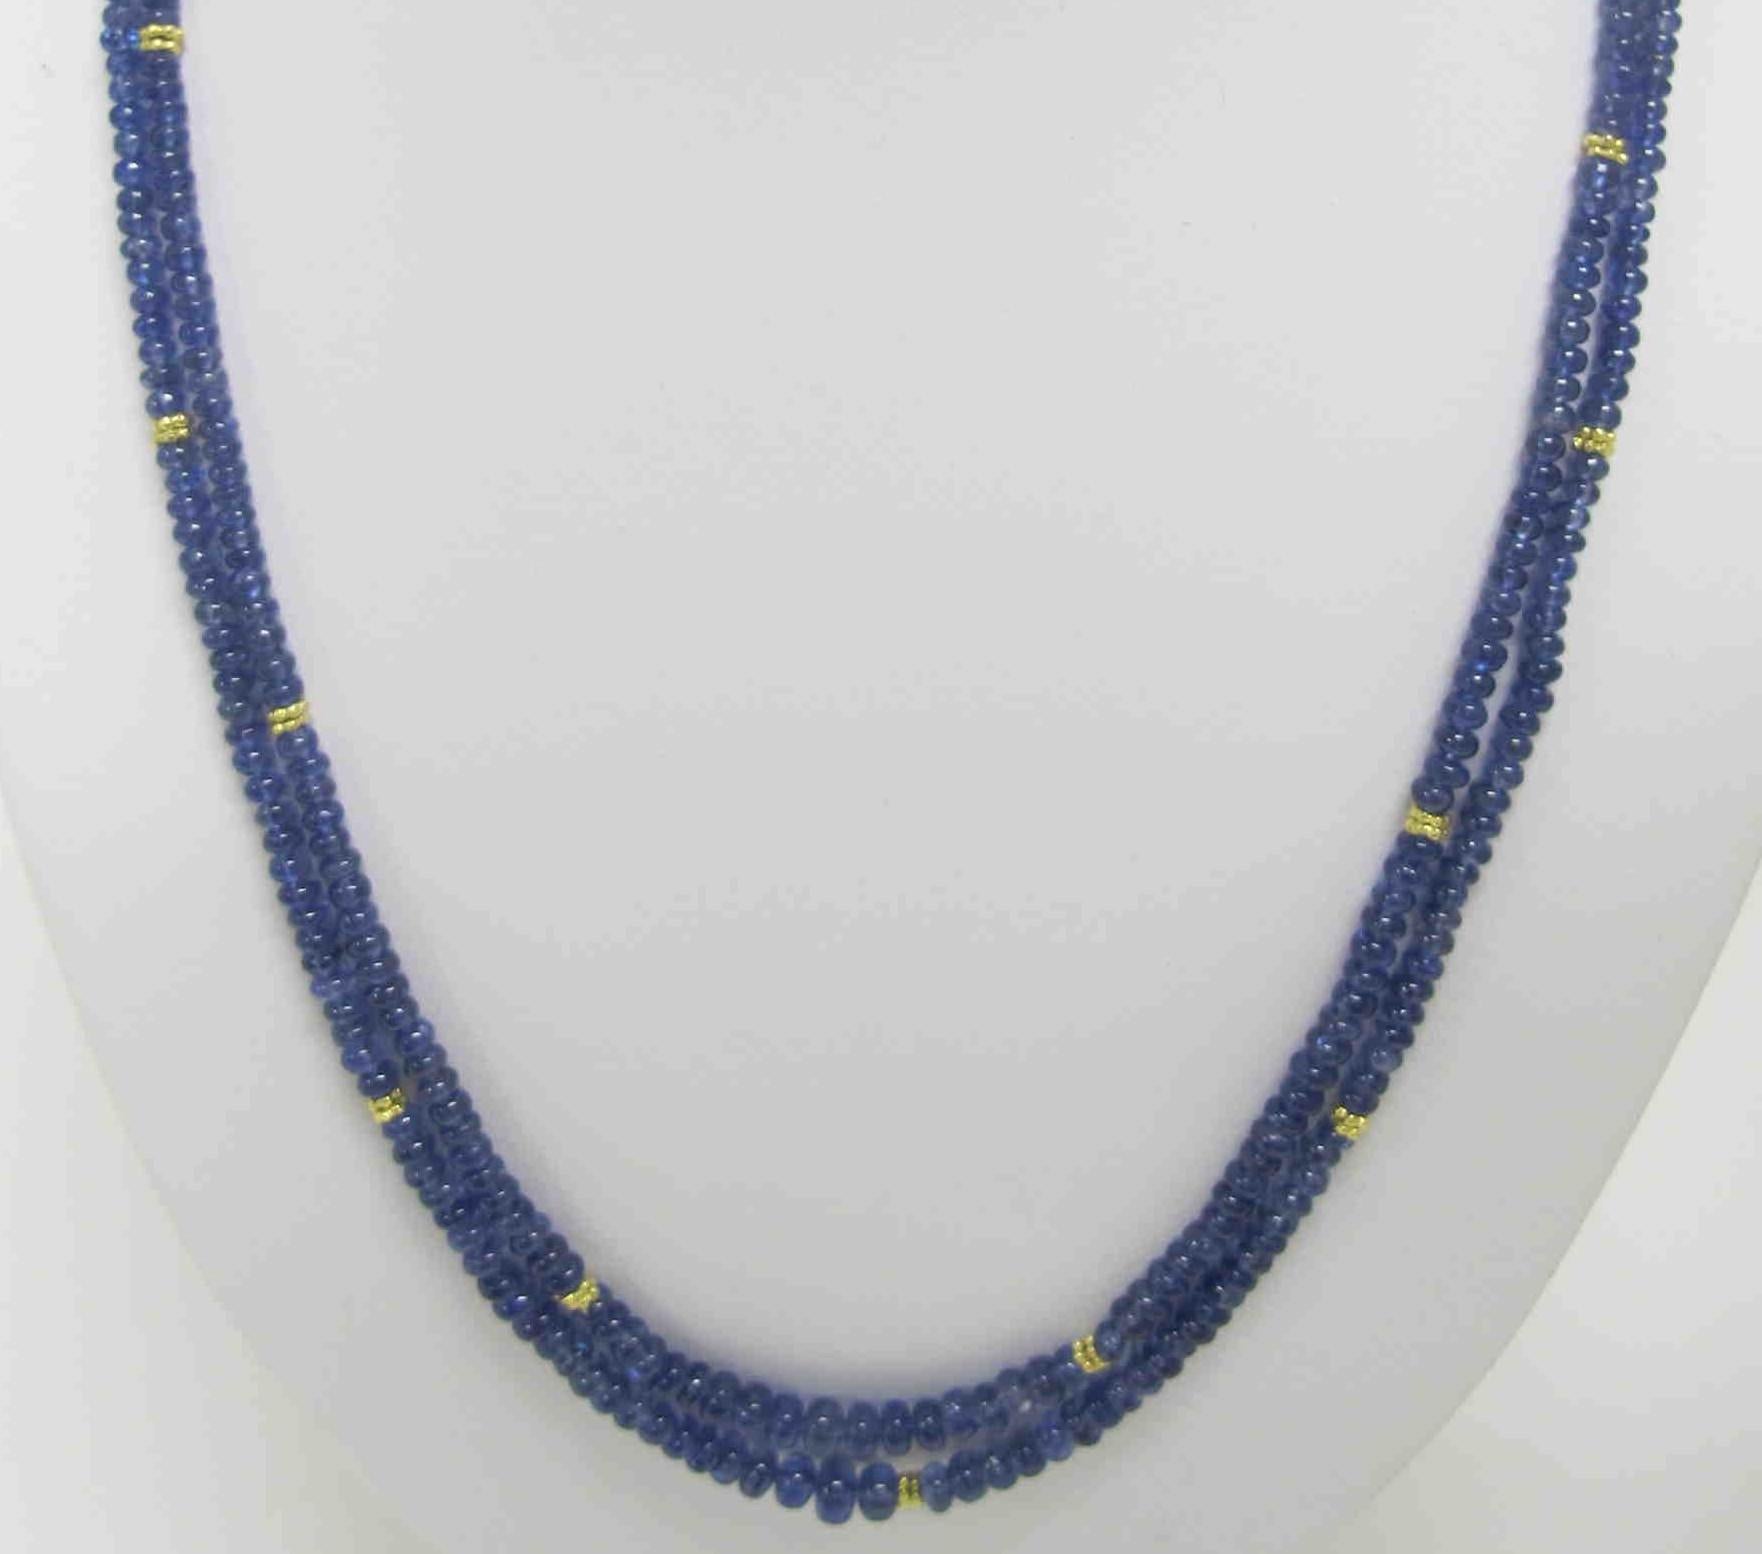 This beautiful double strand of natural blue sapphire beads features approximately 100 carats of graduated beads ranging in size from 1.25 to 5.00mm. The strands measure 18 and 18.5 inches in length, and the 18k yellow gold clasp has a 2-inch